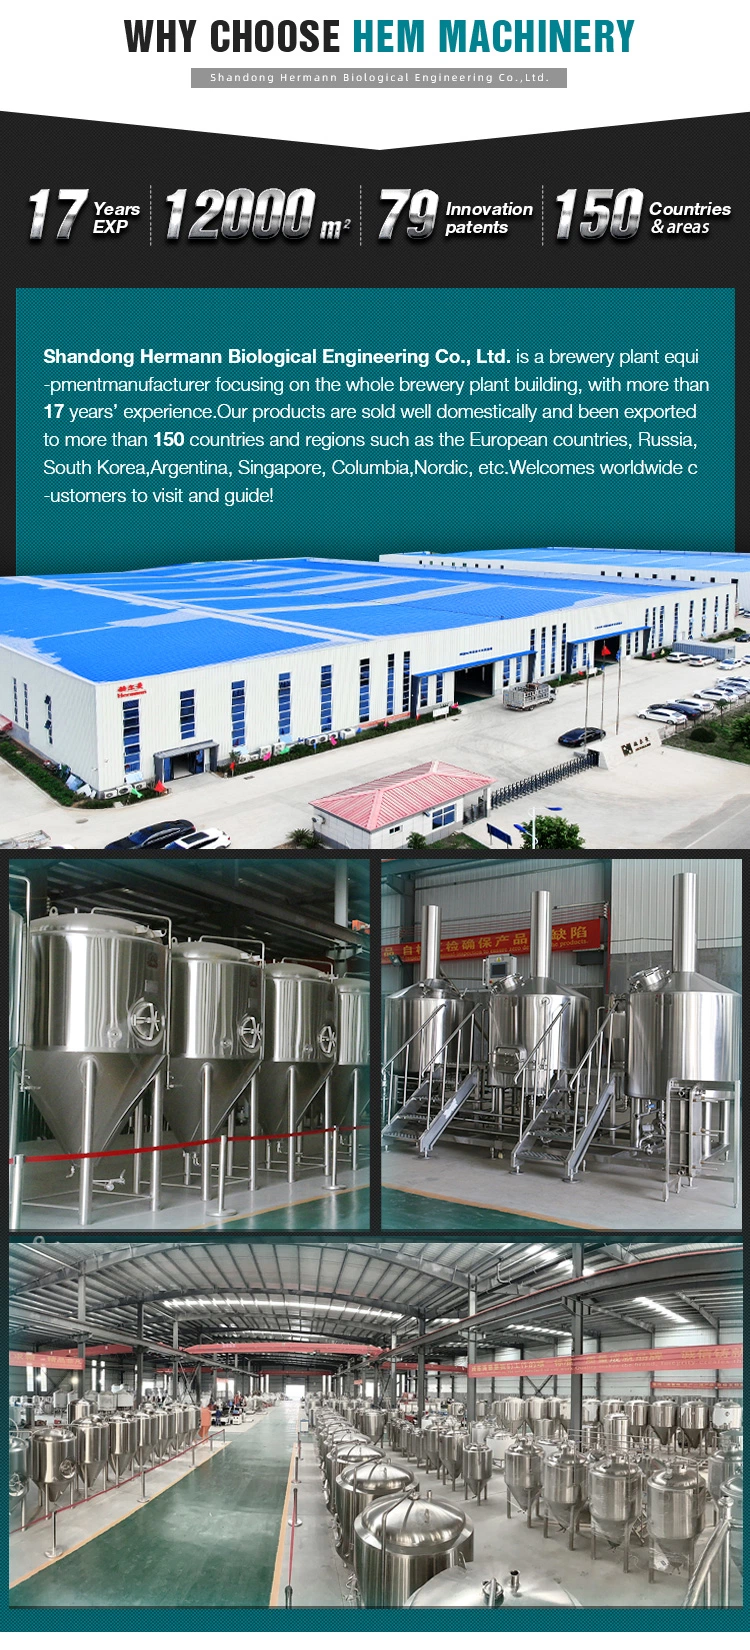 Commercial 30bbl Turnkey Brewery Project with All Necessary Brewery Equipment Made of 304 Stainless Steel